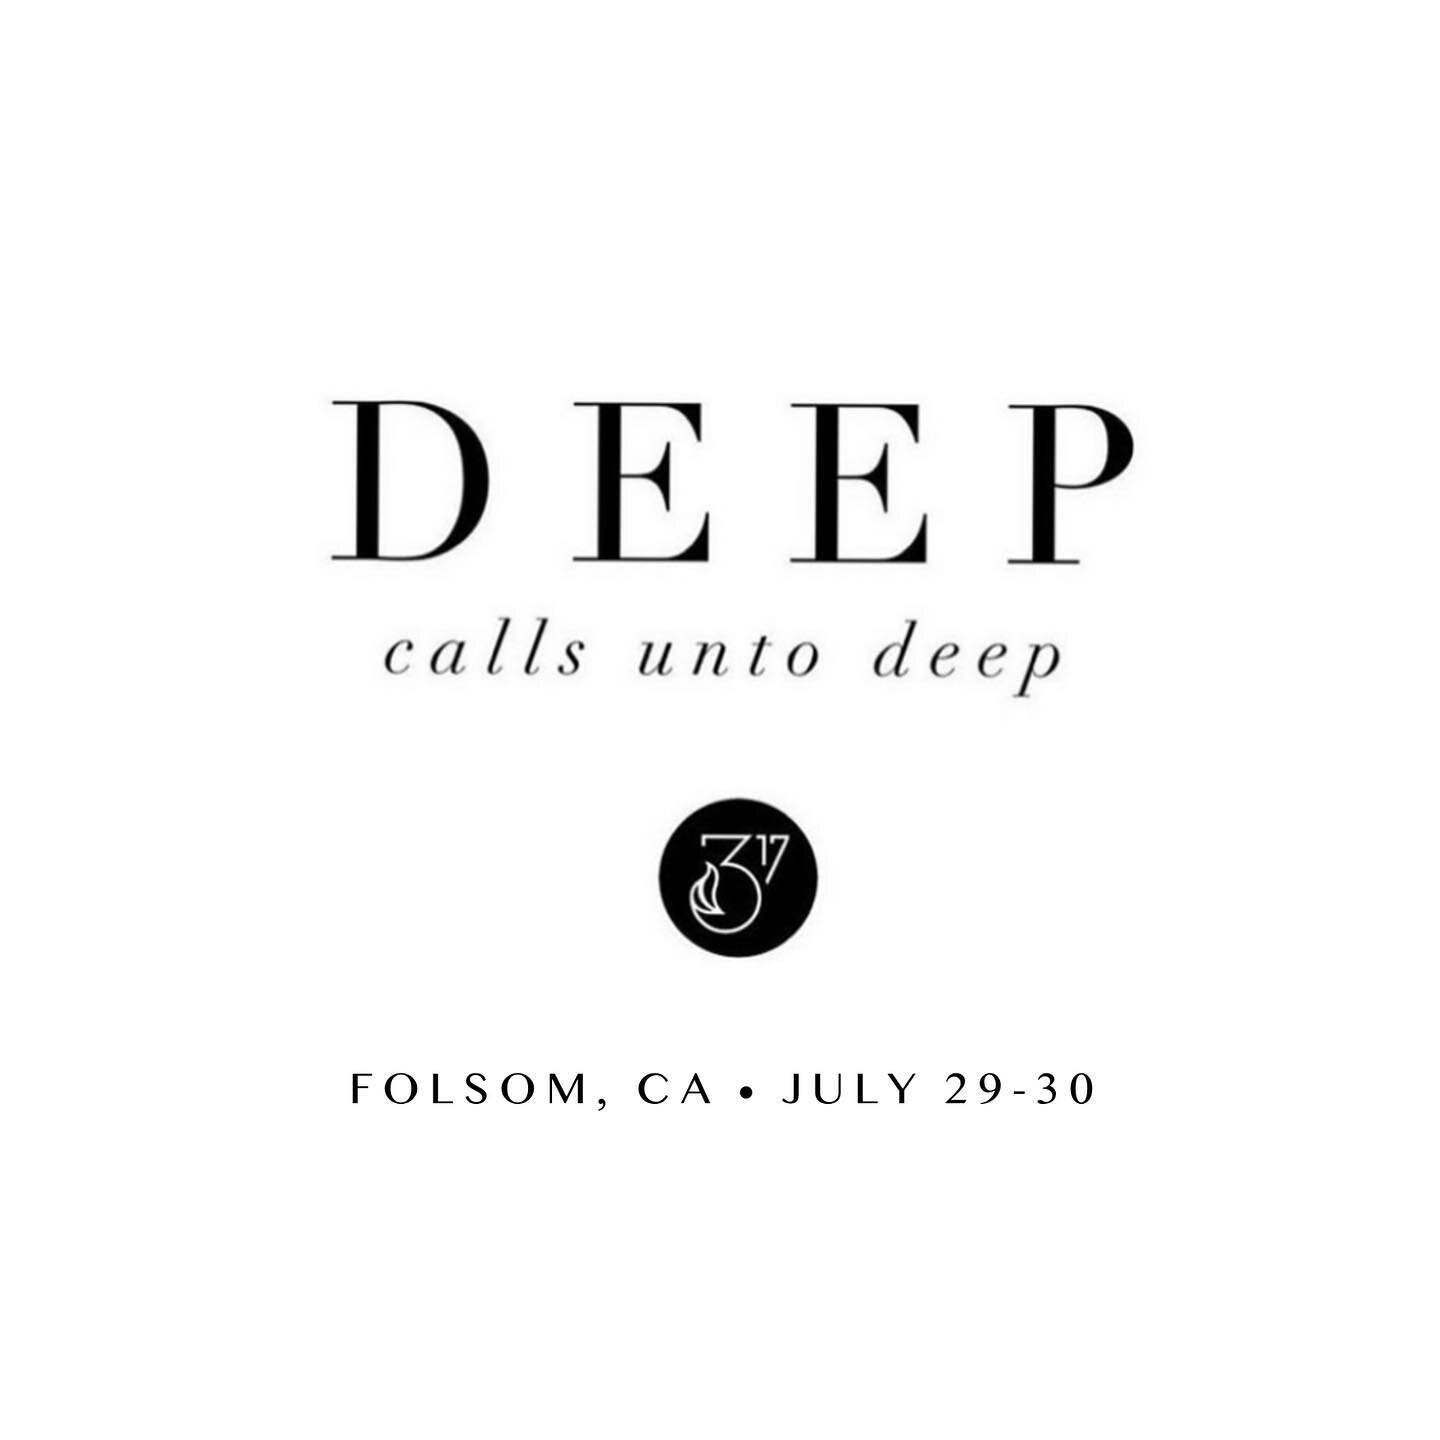 Deep calls unto DEEP✨Ladies- are you ready for OVERFLOW? Join us July 29-30 for DEEP! One encounter with God can change everything! 

Find all the info (including early bird rate) at our event link www.Deep317.com ( LINK IN BIO )

#deep317 #encounter